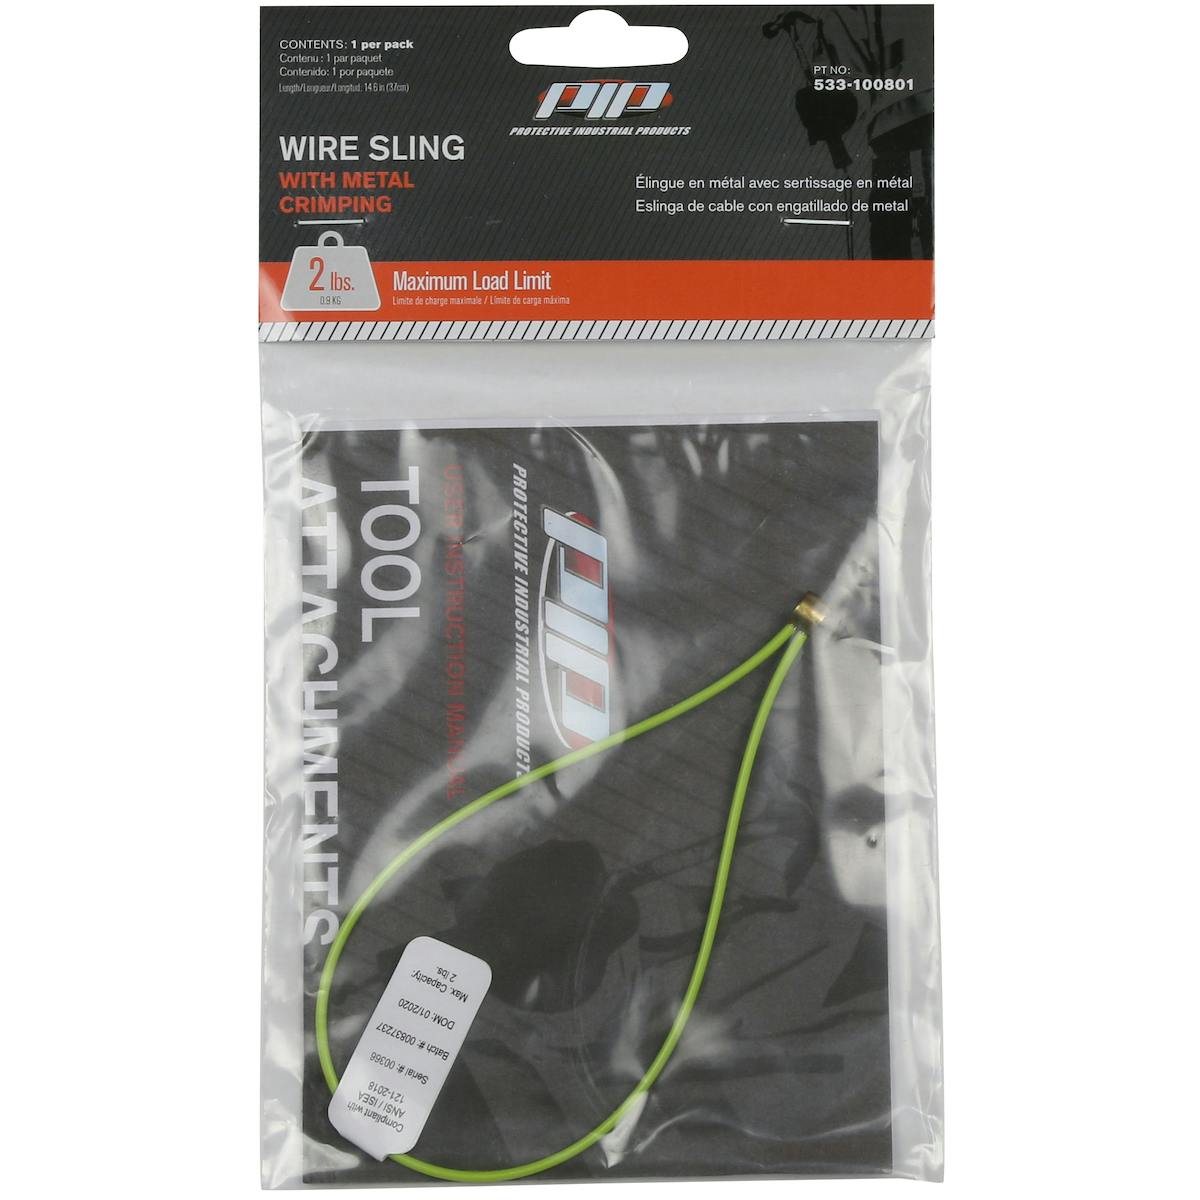 Wire Sling Loop - 2 lbs. maximum load limit - Retail Packaged, Red (533-100801) - OS_0